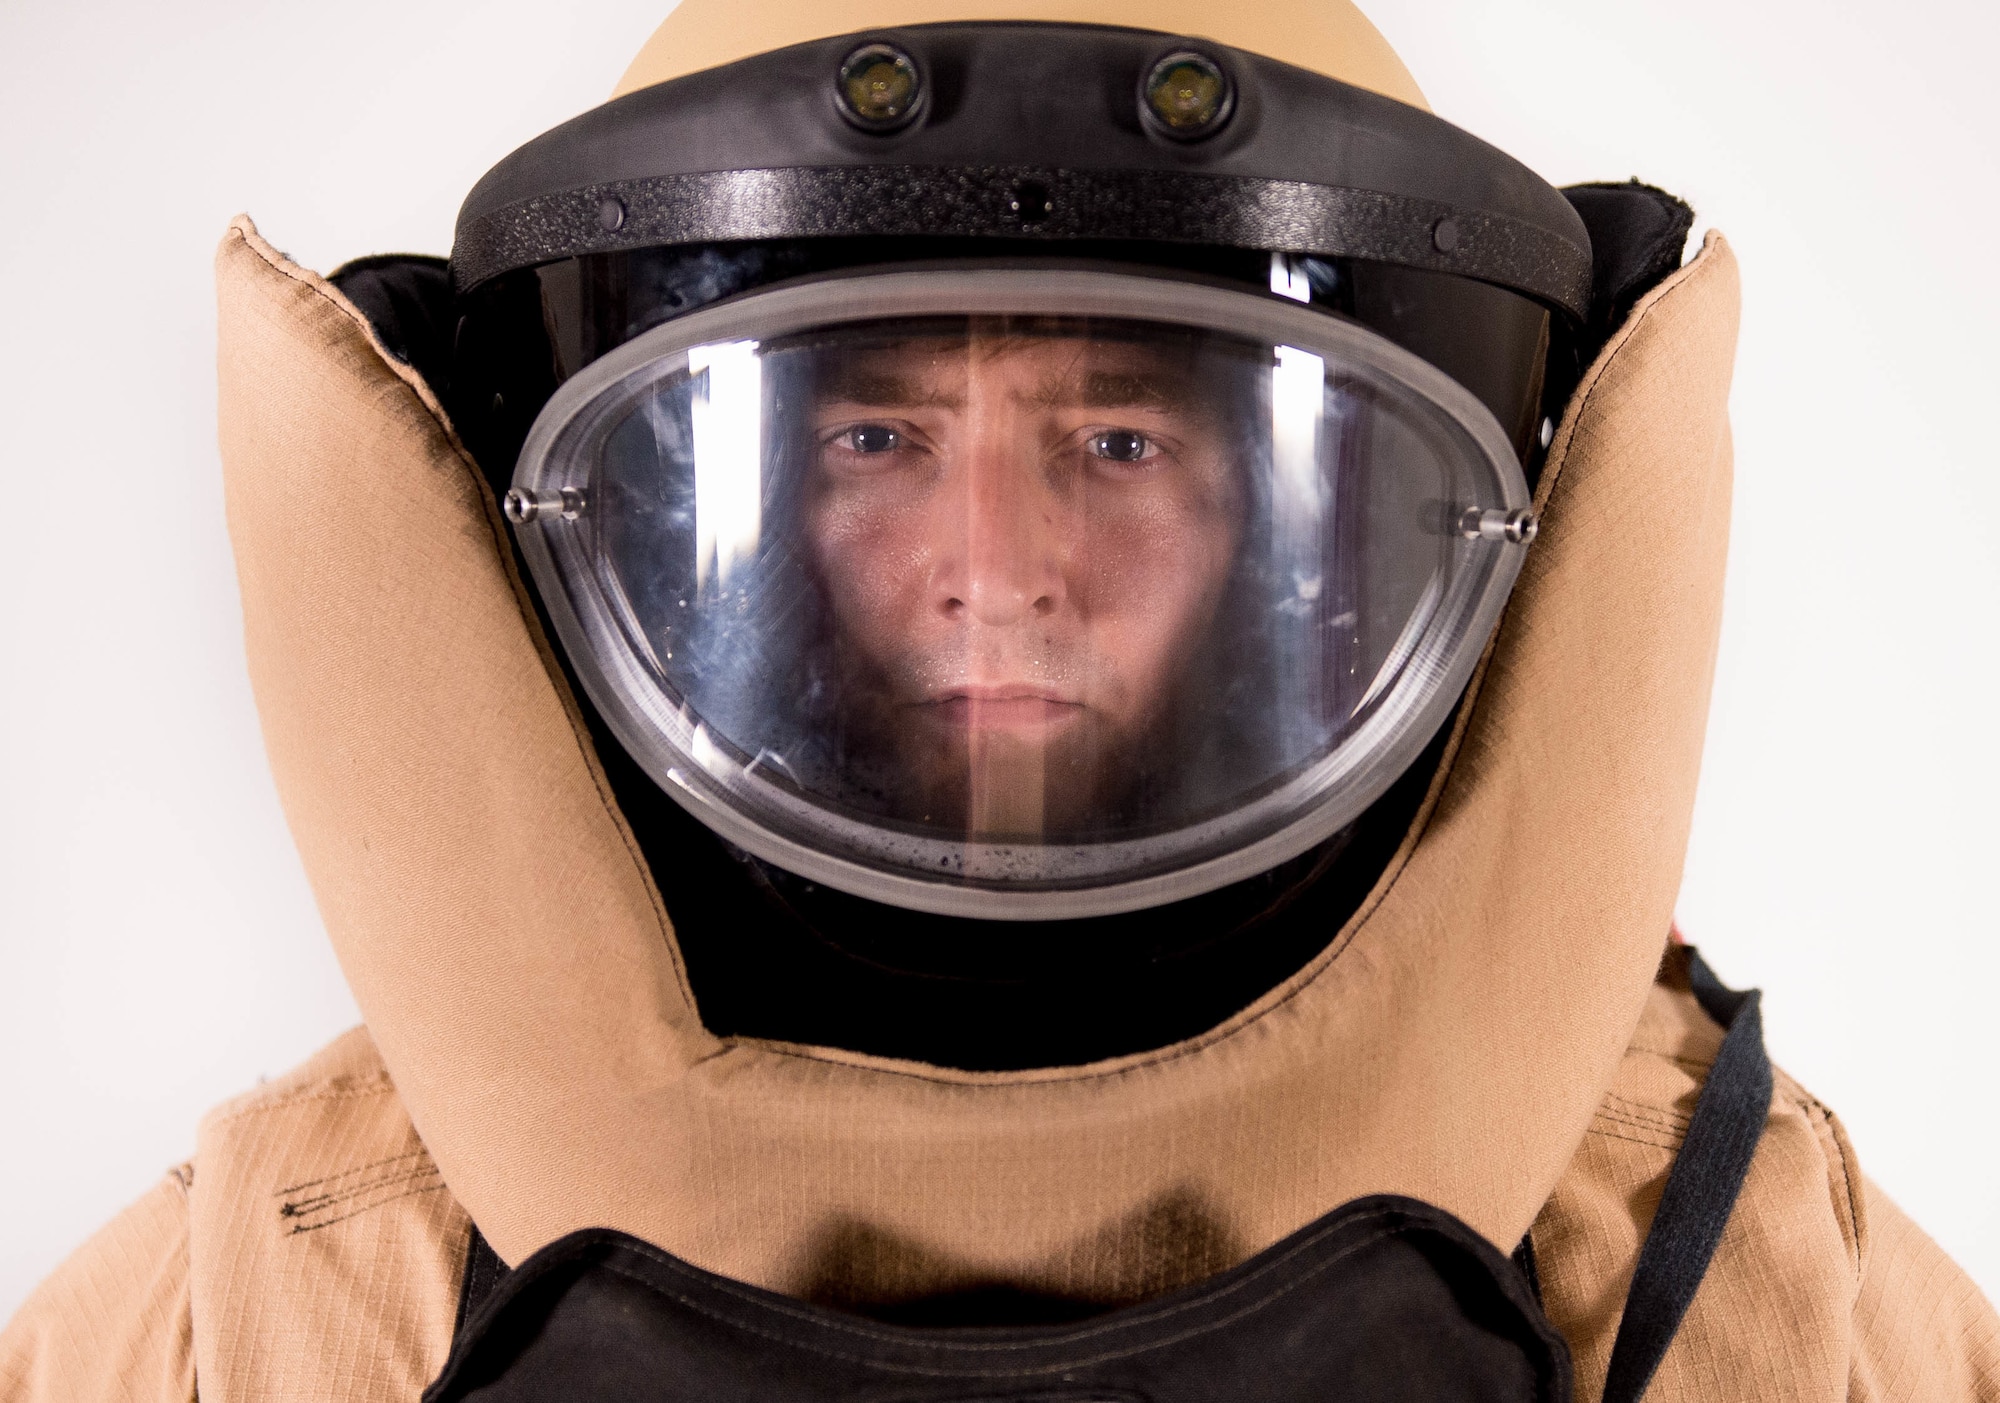 Staff Sgt. Jeffrey Knelange, 56th Civil Engineer Squadron EOD training NCO, stands in his bomb suit at Luke Air Force Base, Ariz., July 10, 2017. Knelange has learned to balance the demands of being an EOD professional while being a key component to the success of the Luke Thunderbolts Hockey team which is a vital part of his comprehensive fitness. (U.S. Air Force photo/Staff Sgt. Jensen Stidham)